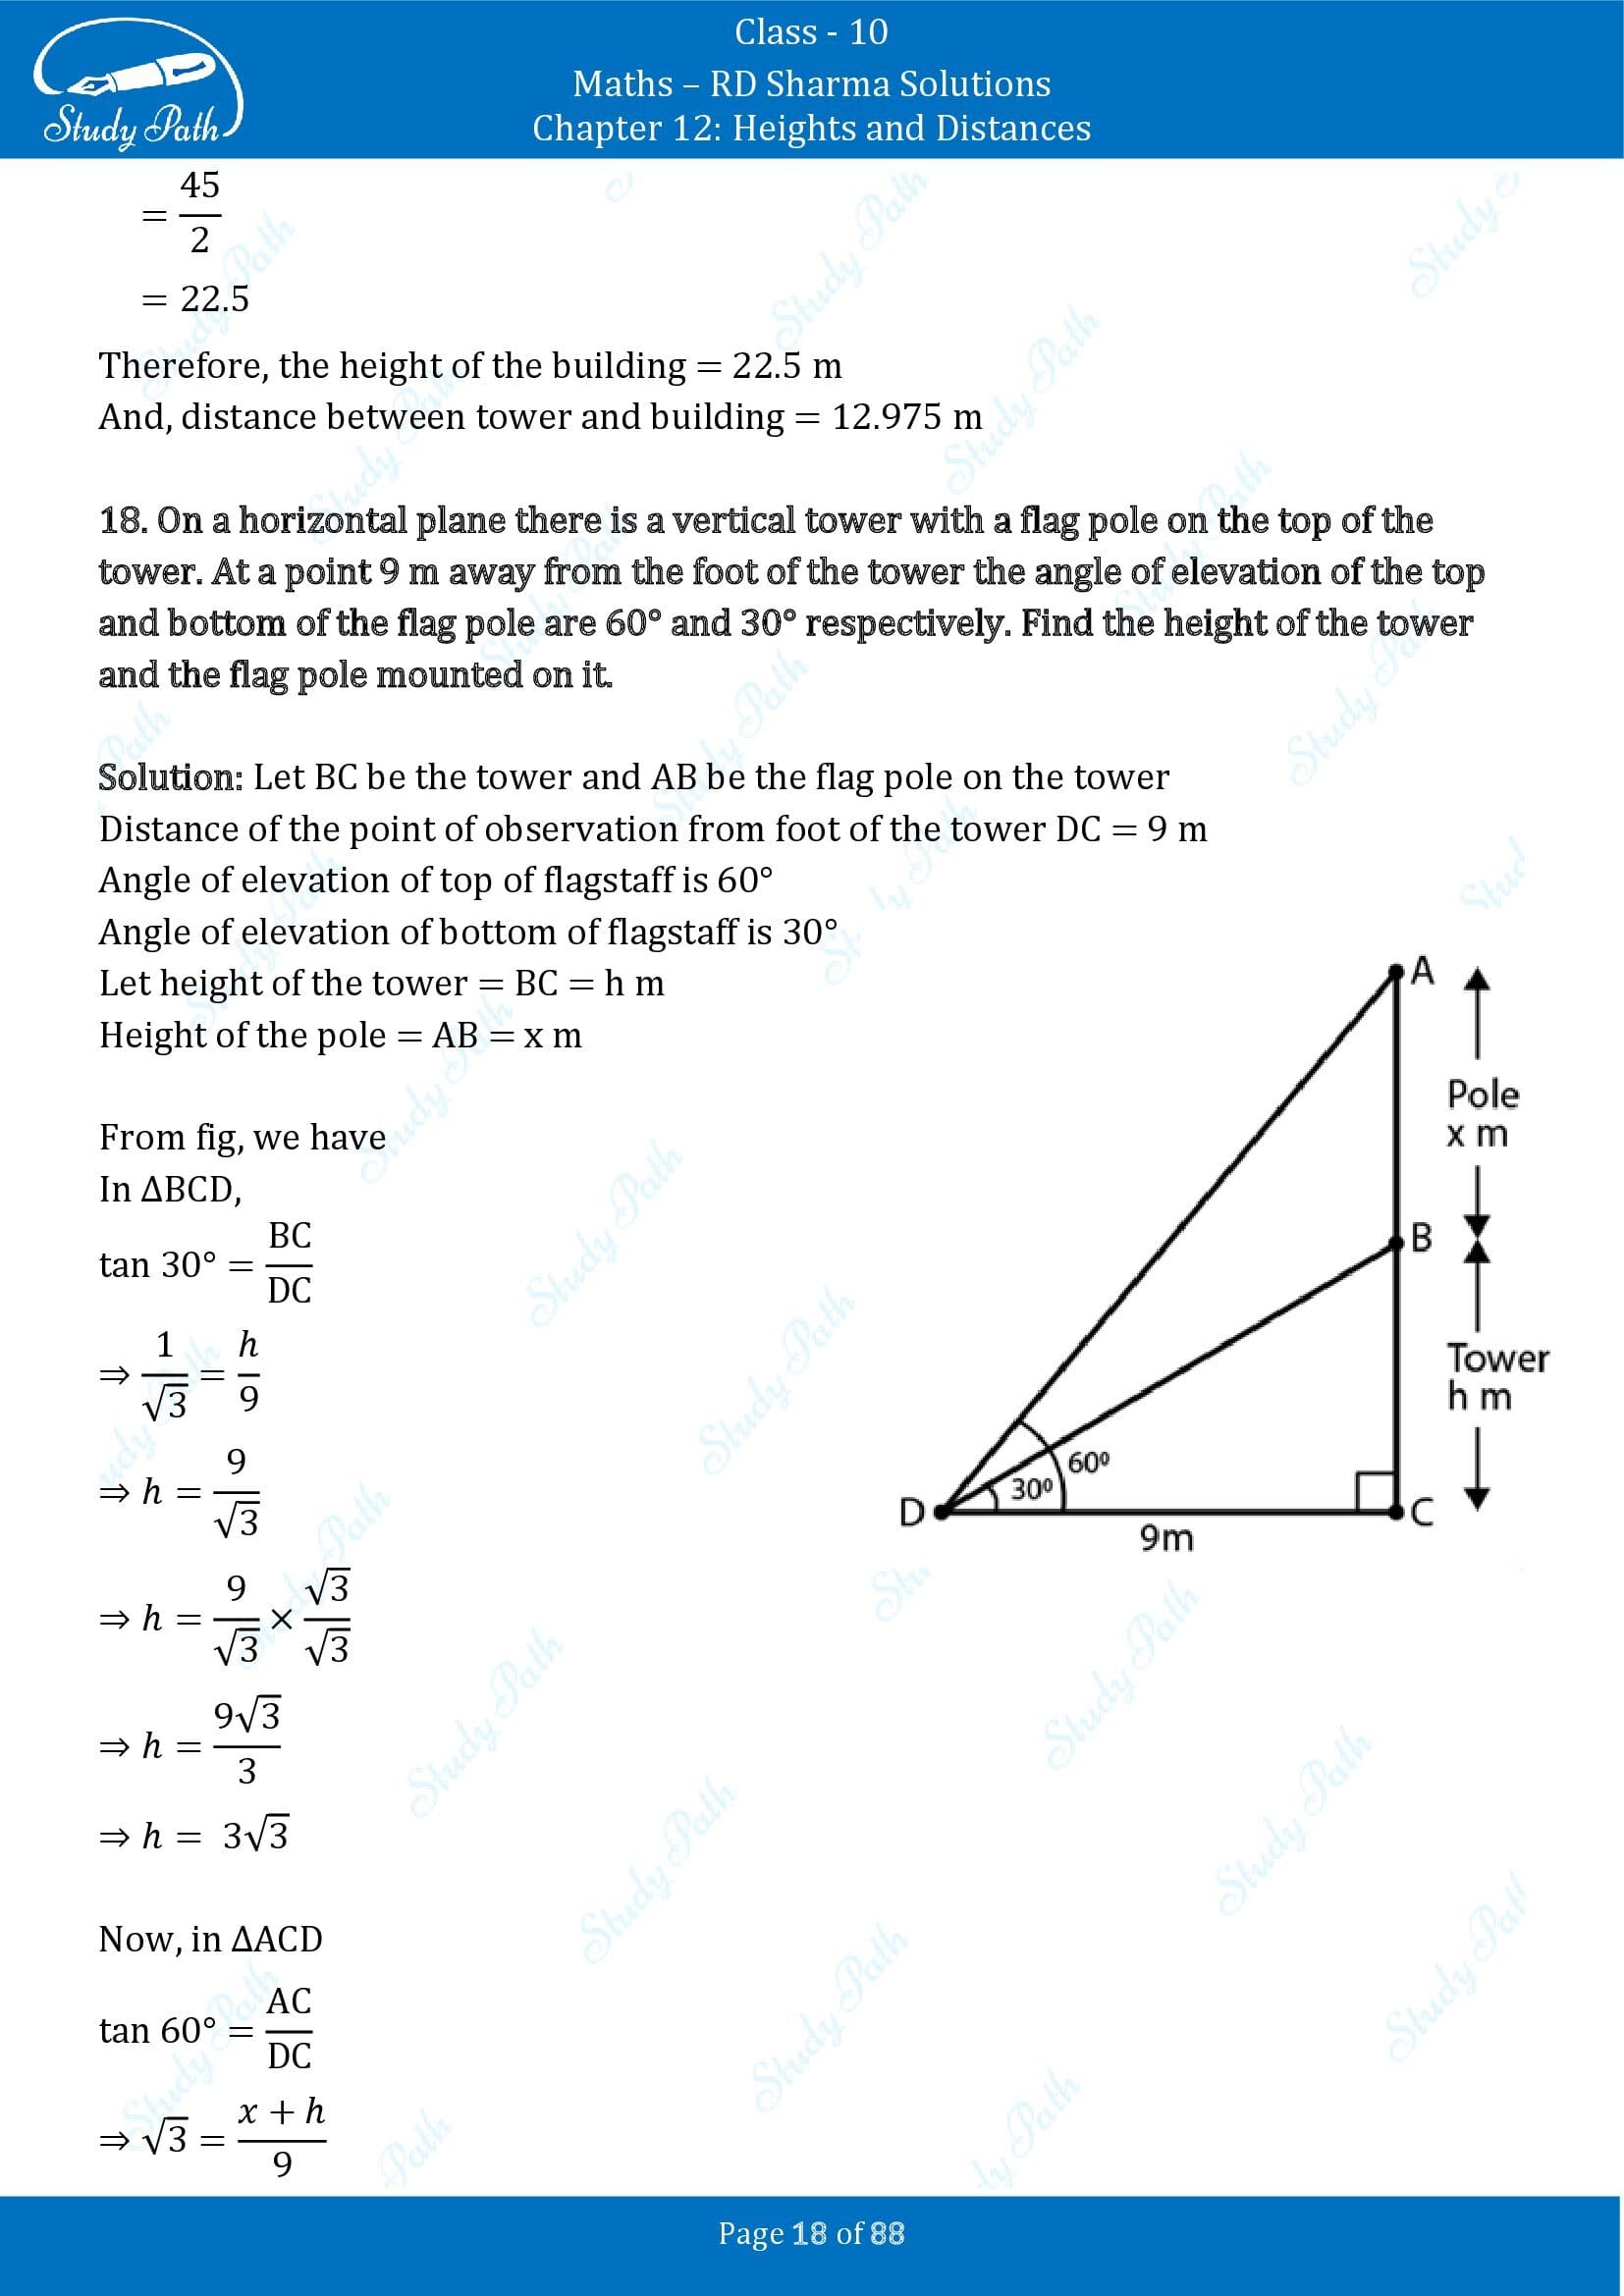 RD Sharma Solutions Class 10 Chapter 12 Heights and Distances Exercise 12.1 00018